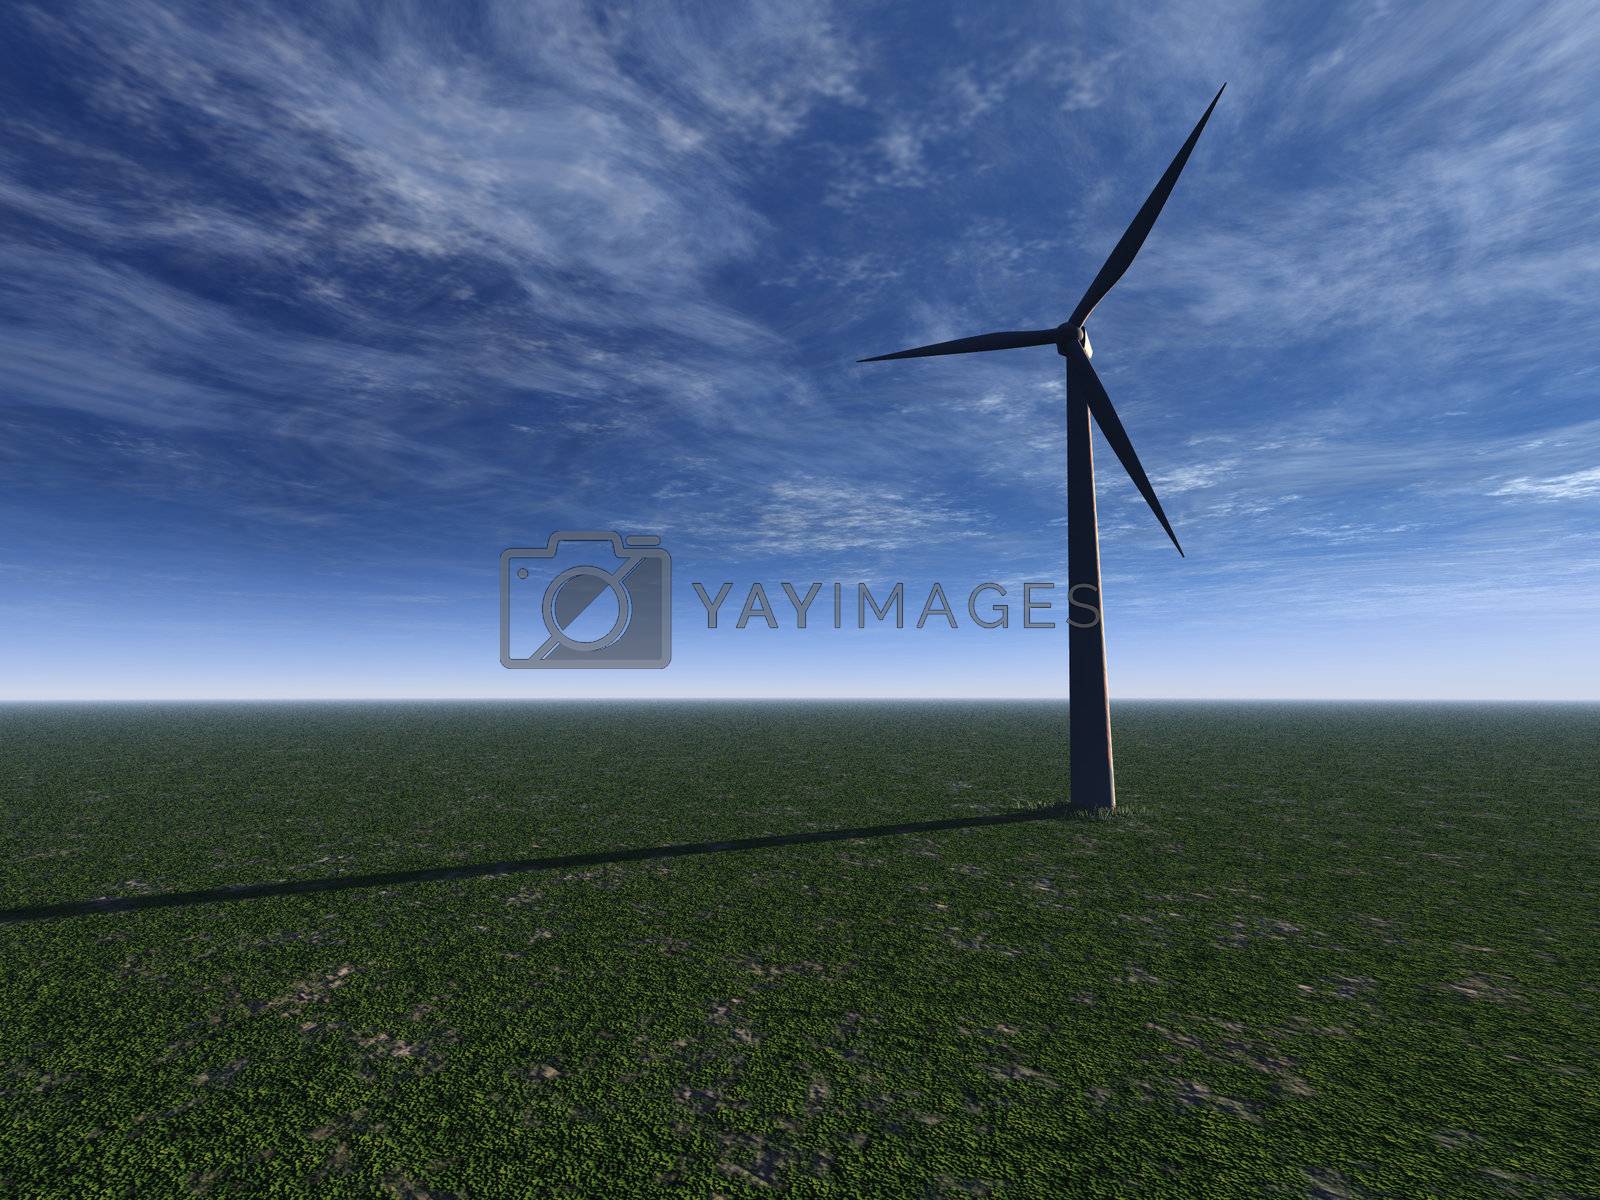 Royalty free image of windmill by drizzd